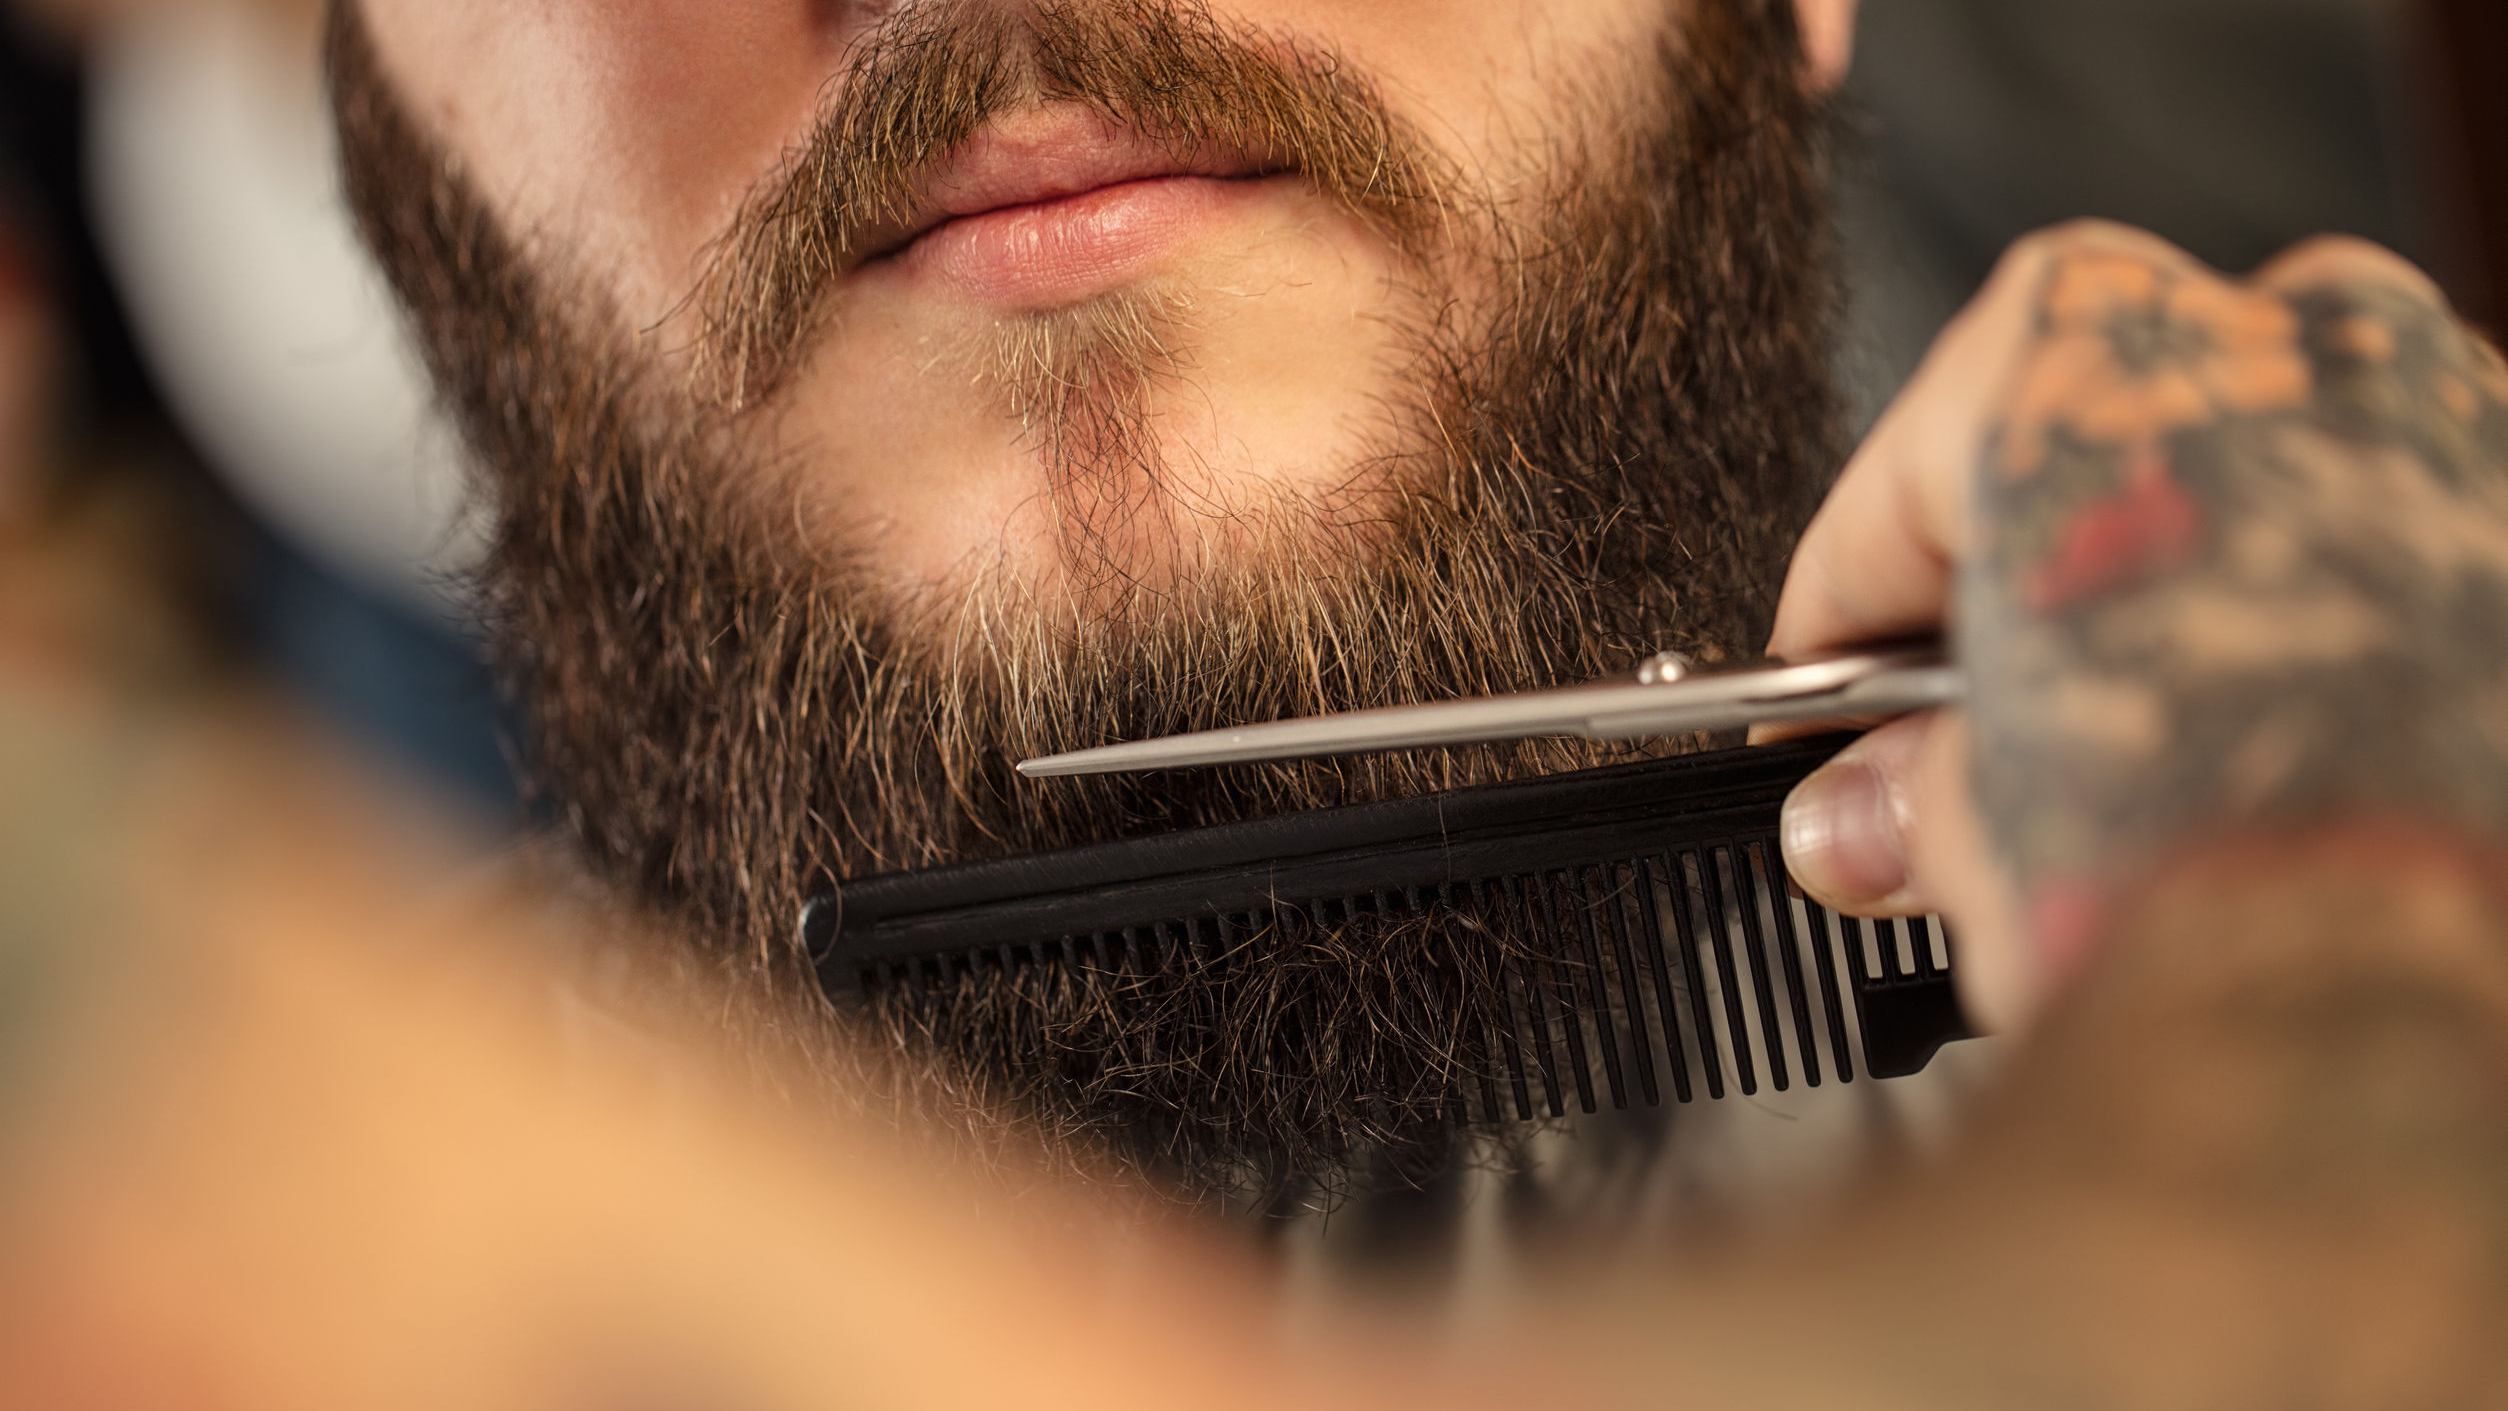 How To Shape A Beard The Ultimate Guide For Every Face Shape The Manual